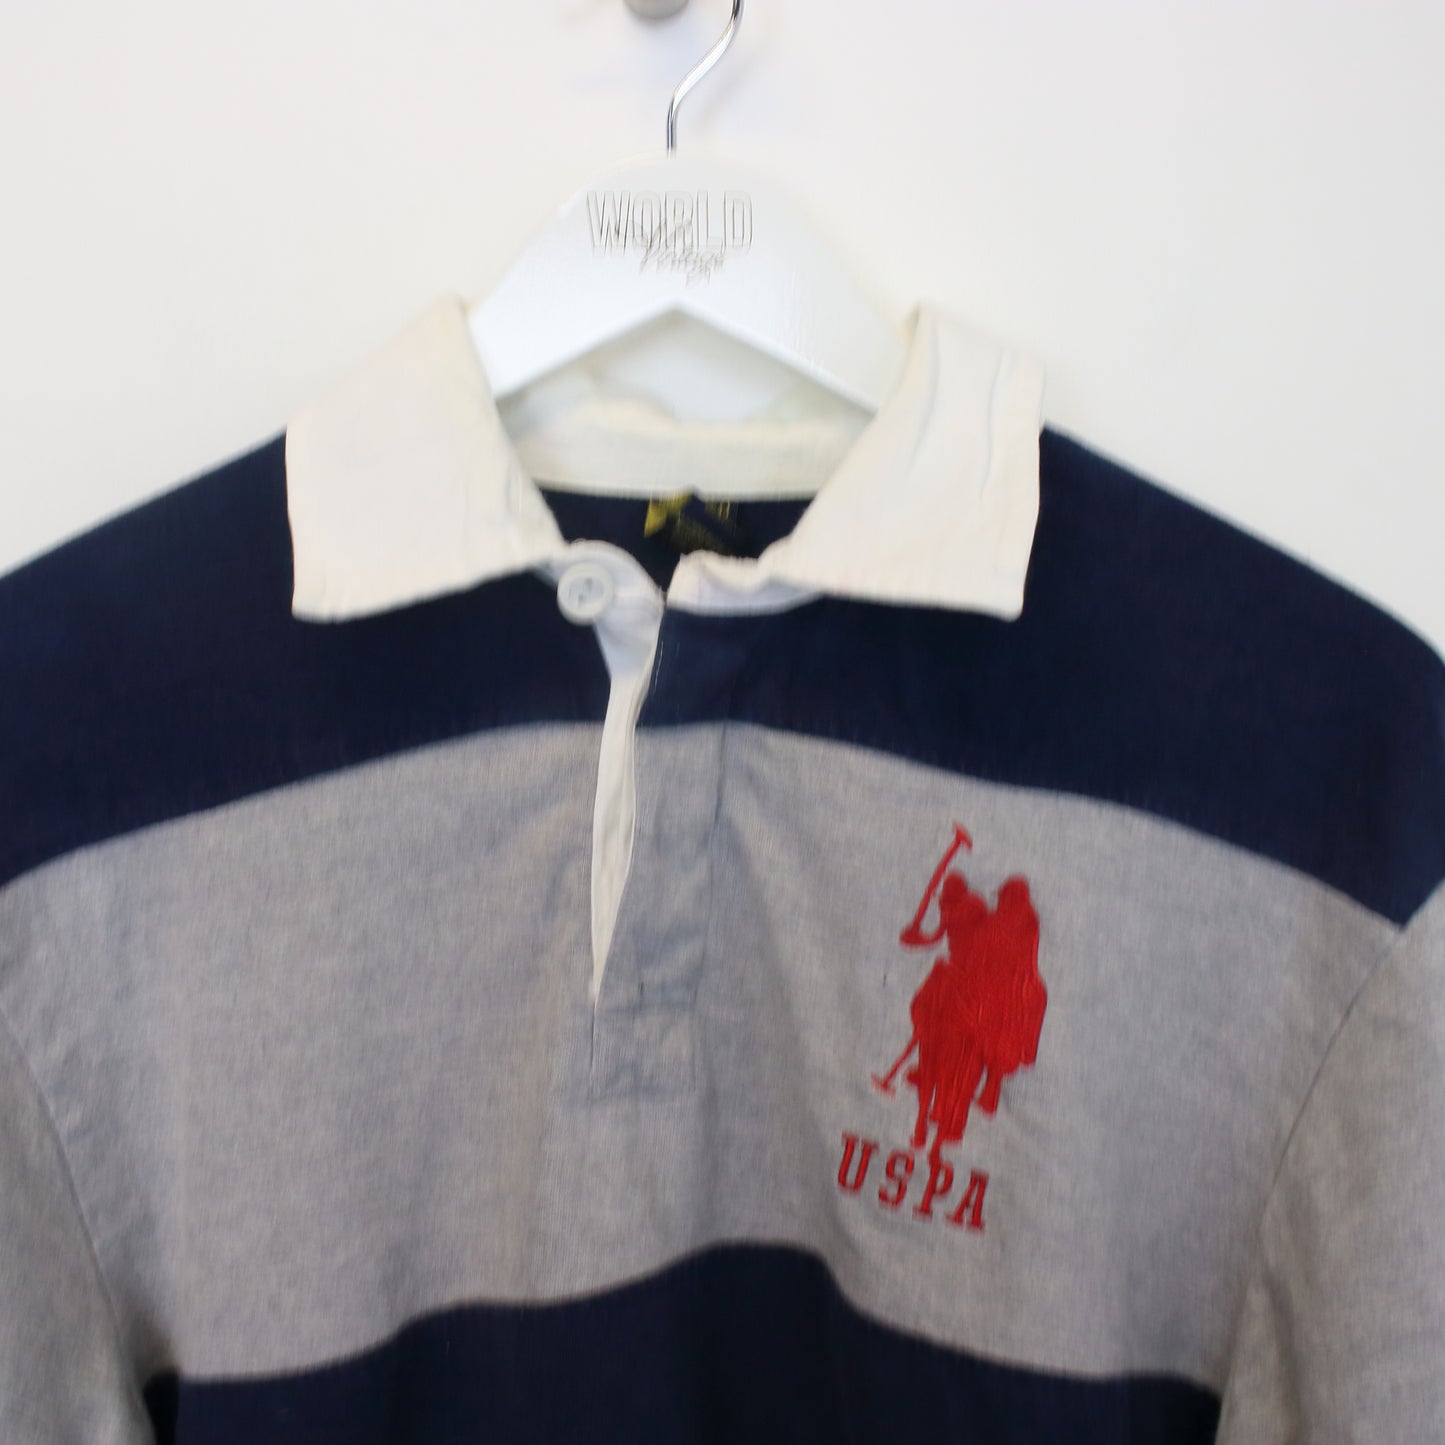 Vintage US Polo Assn rugby shirt in grey and navy. Best fits M